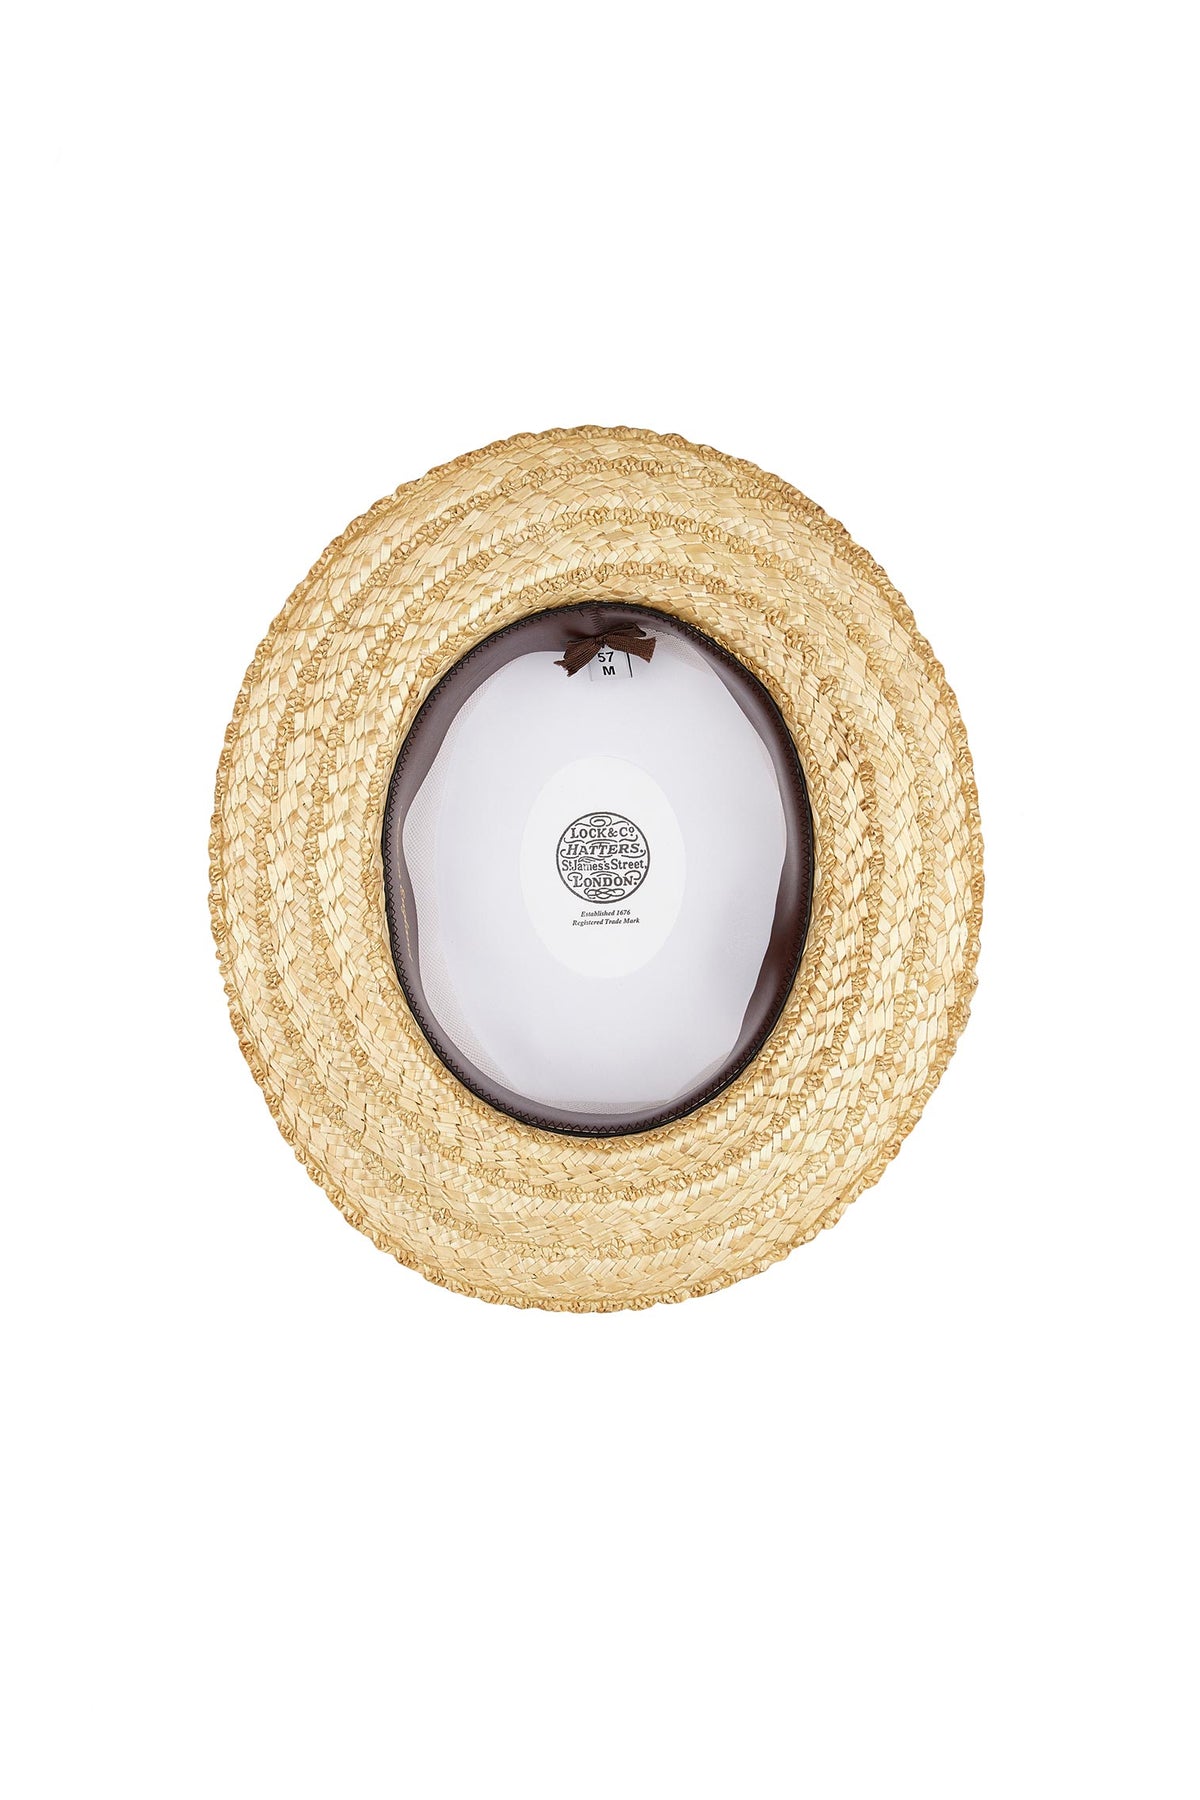 Classic Boater Straw Hat - Lock & Co. Hatters UK